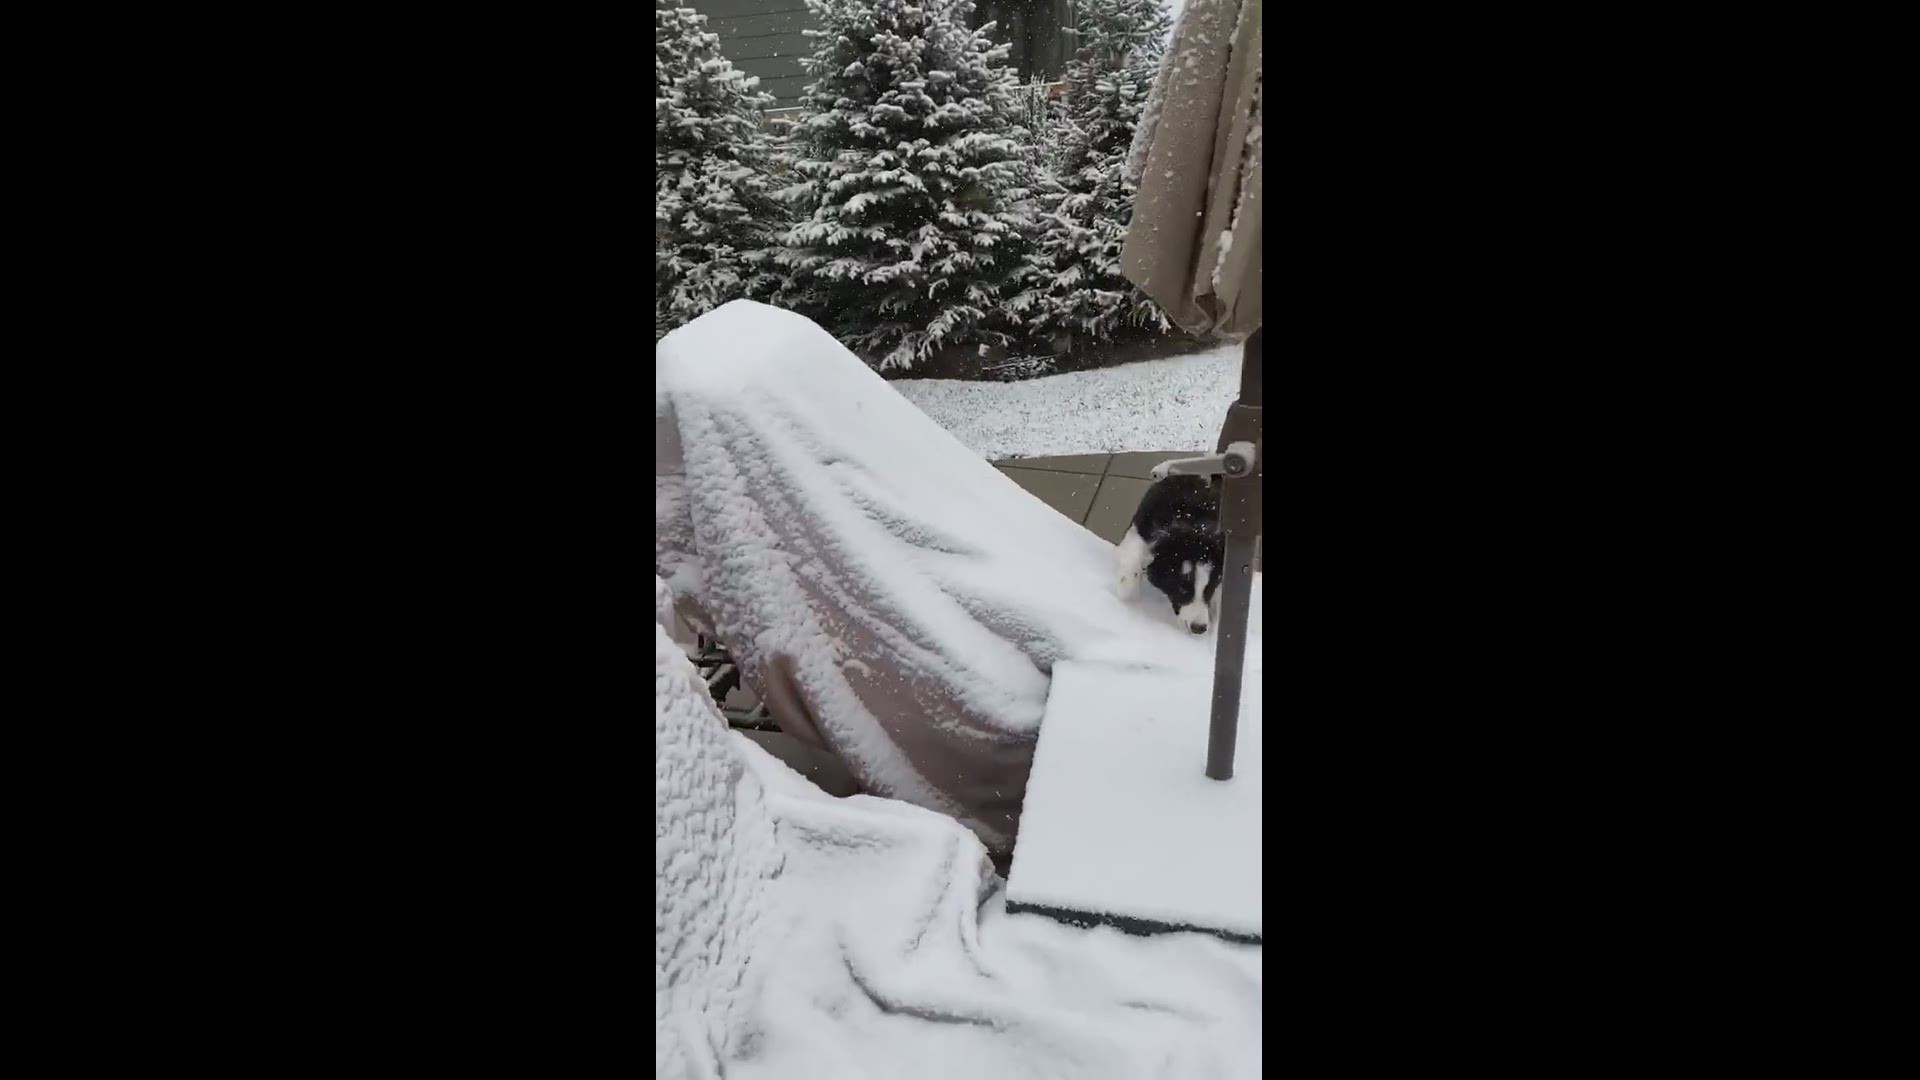 Our border Collie puppy discovers snow.
Credit: Cheryl Zenor